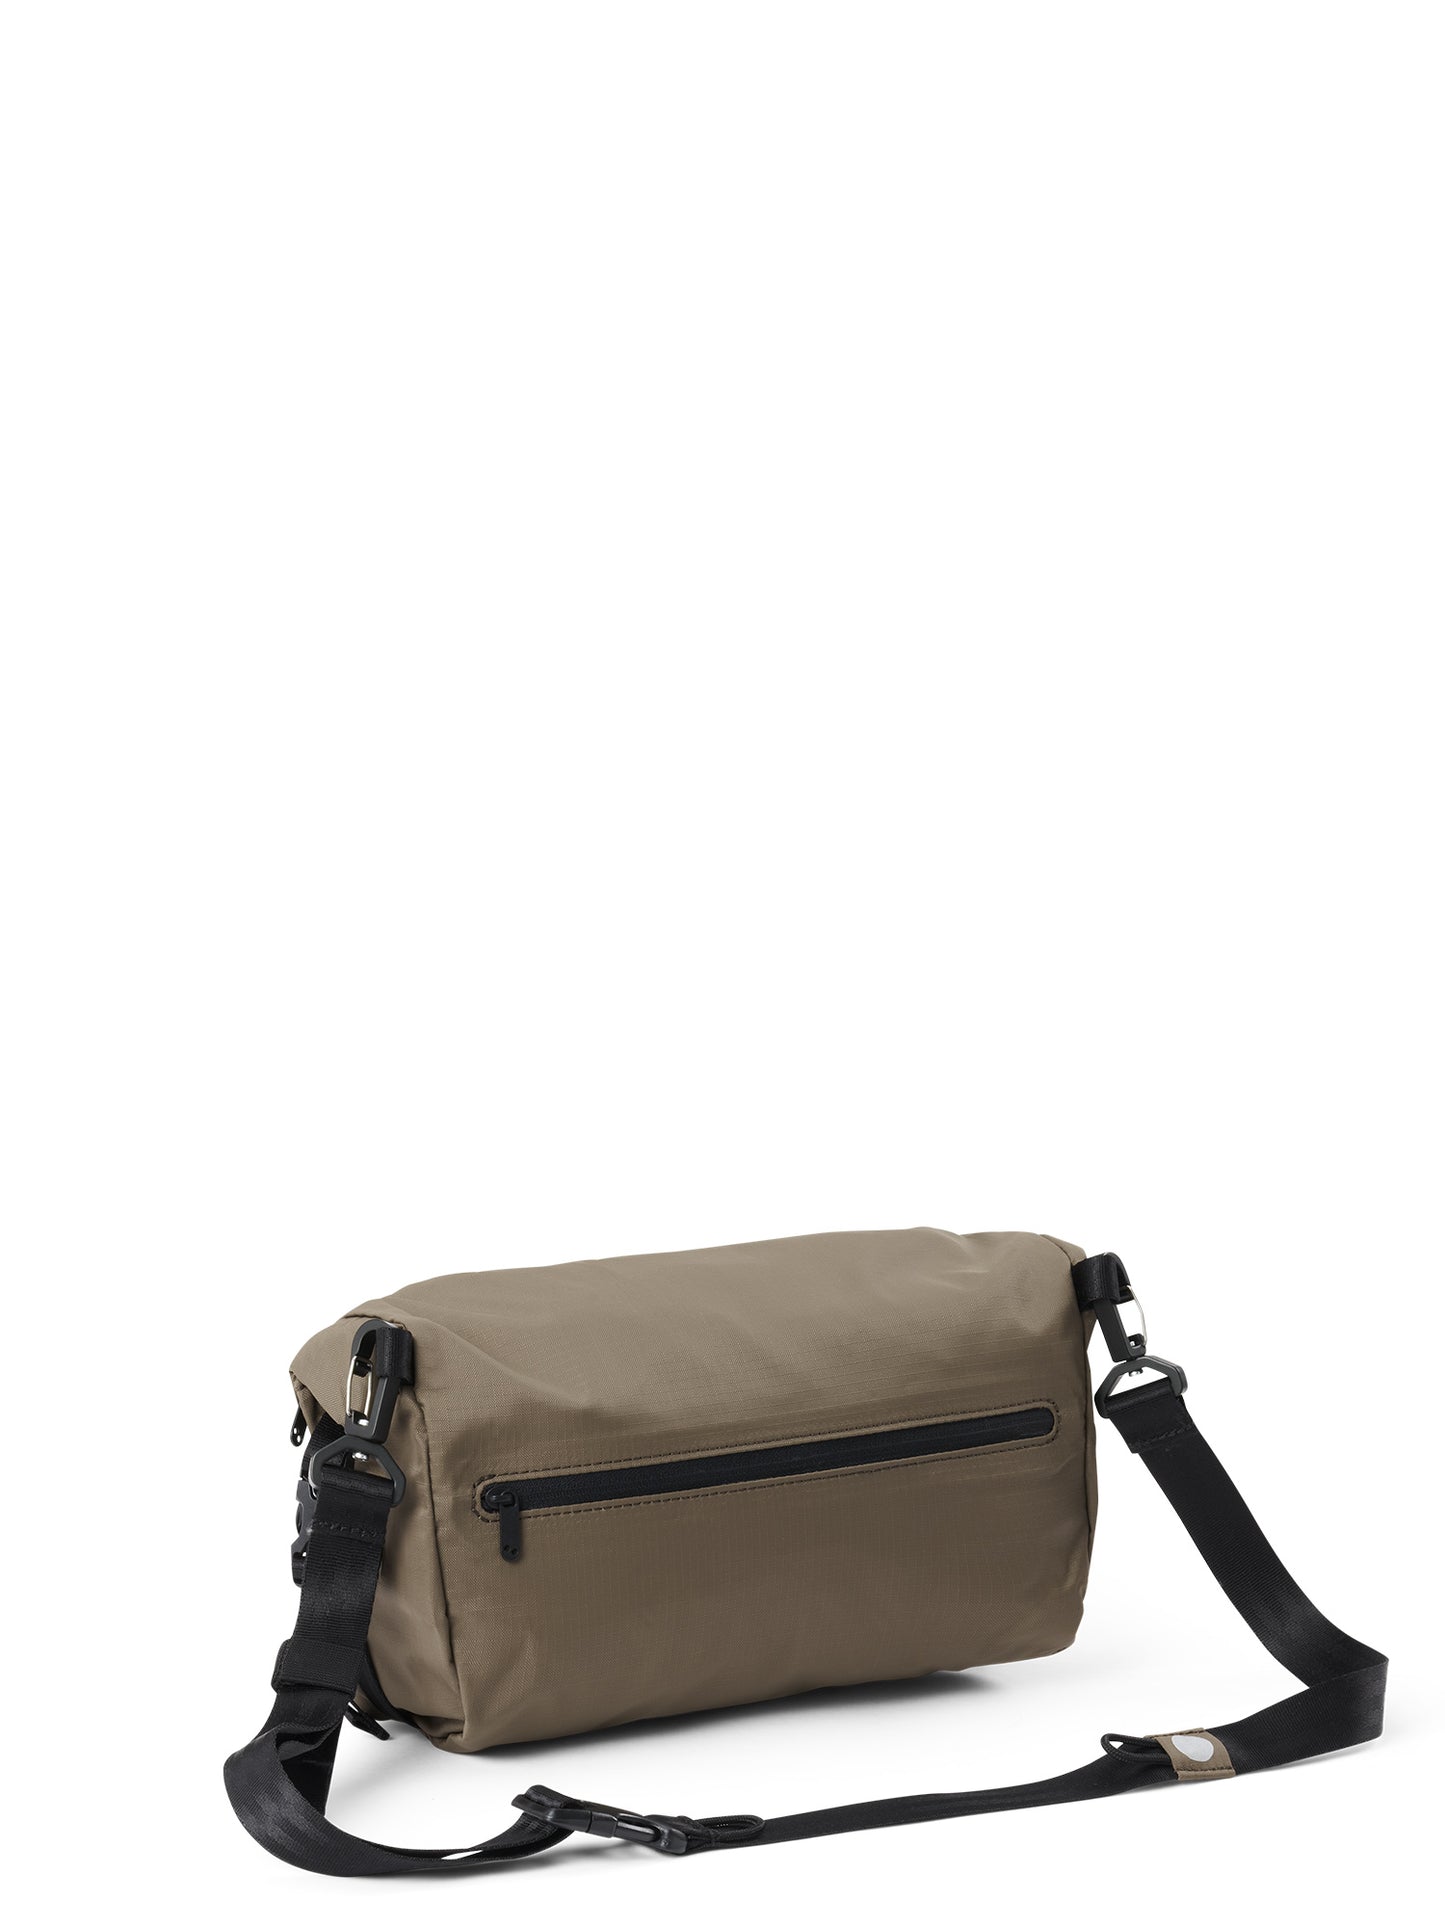 pinqponq-Aksel-Pure-Brown-back